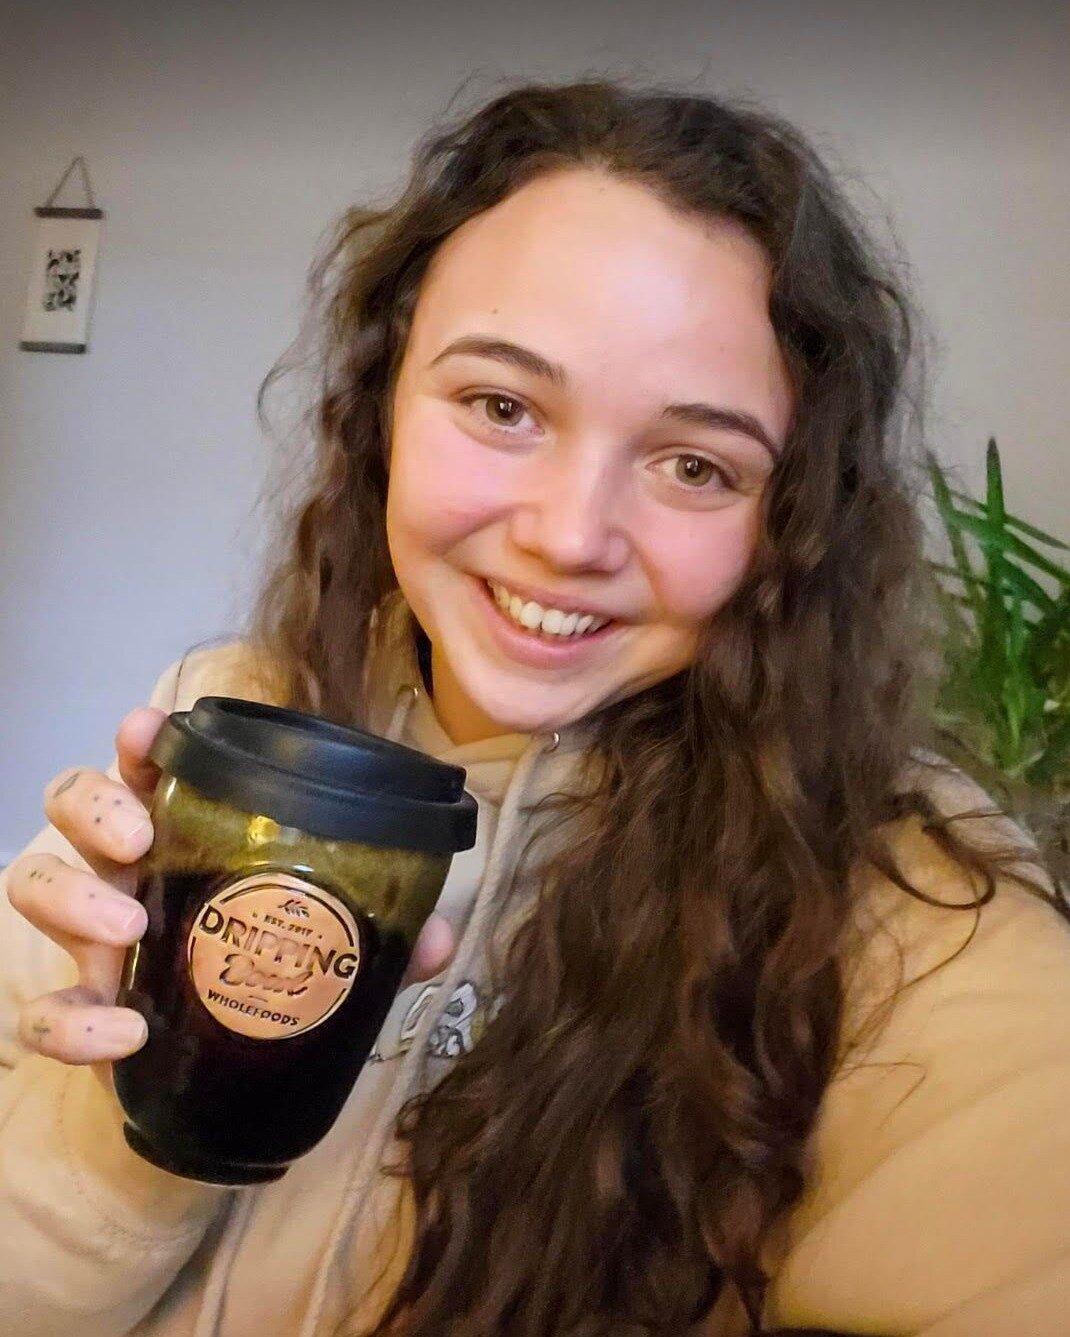 Our keep cups have made it global team, all the way to Canada, with our beautiful Jilly!! 🇨🇦 

We're so stoked it to you safely, and now you have a daily reminder of your Dripping Bowl whānau &amp; friends who love and miss you dearly 🧡🧡 

Proof 